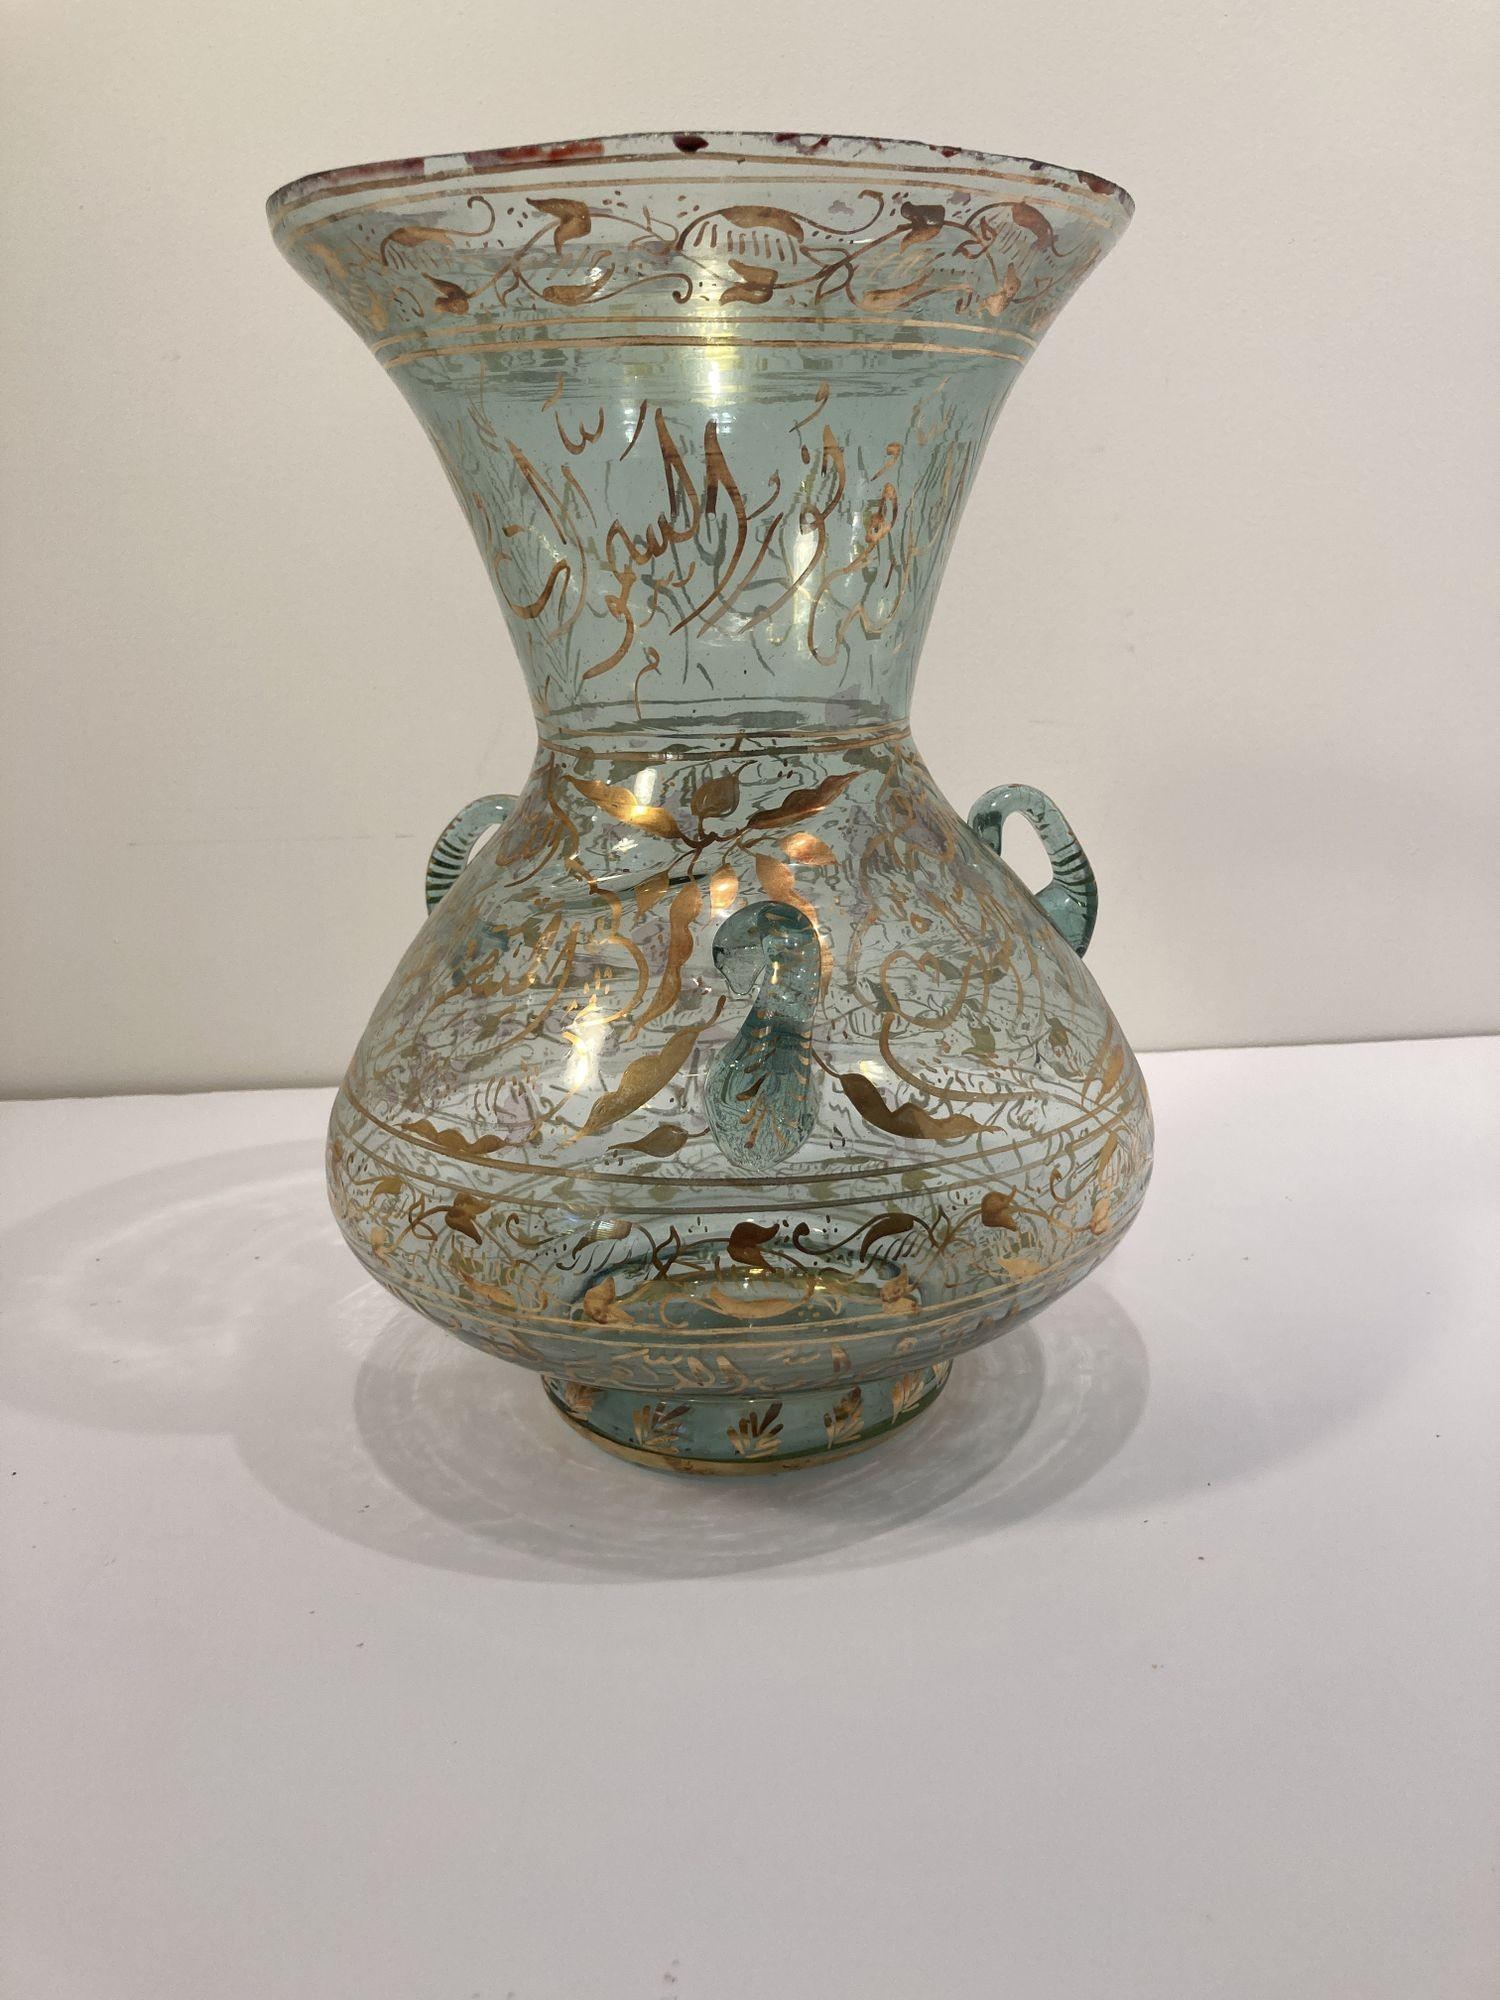 Handblown Mosque glass oil lamp in Mameluke style gilded with Arabic Calligraphy
Middle Eastern Mosque lamp in the Islamic tradition, Moorish style hand painted blown clear glass with gilded calligraphic inscriptions.
Dimensions: 14.5in. height x